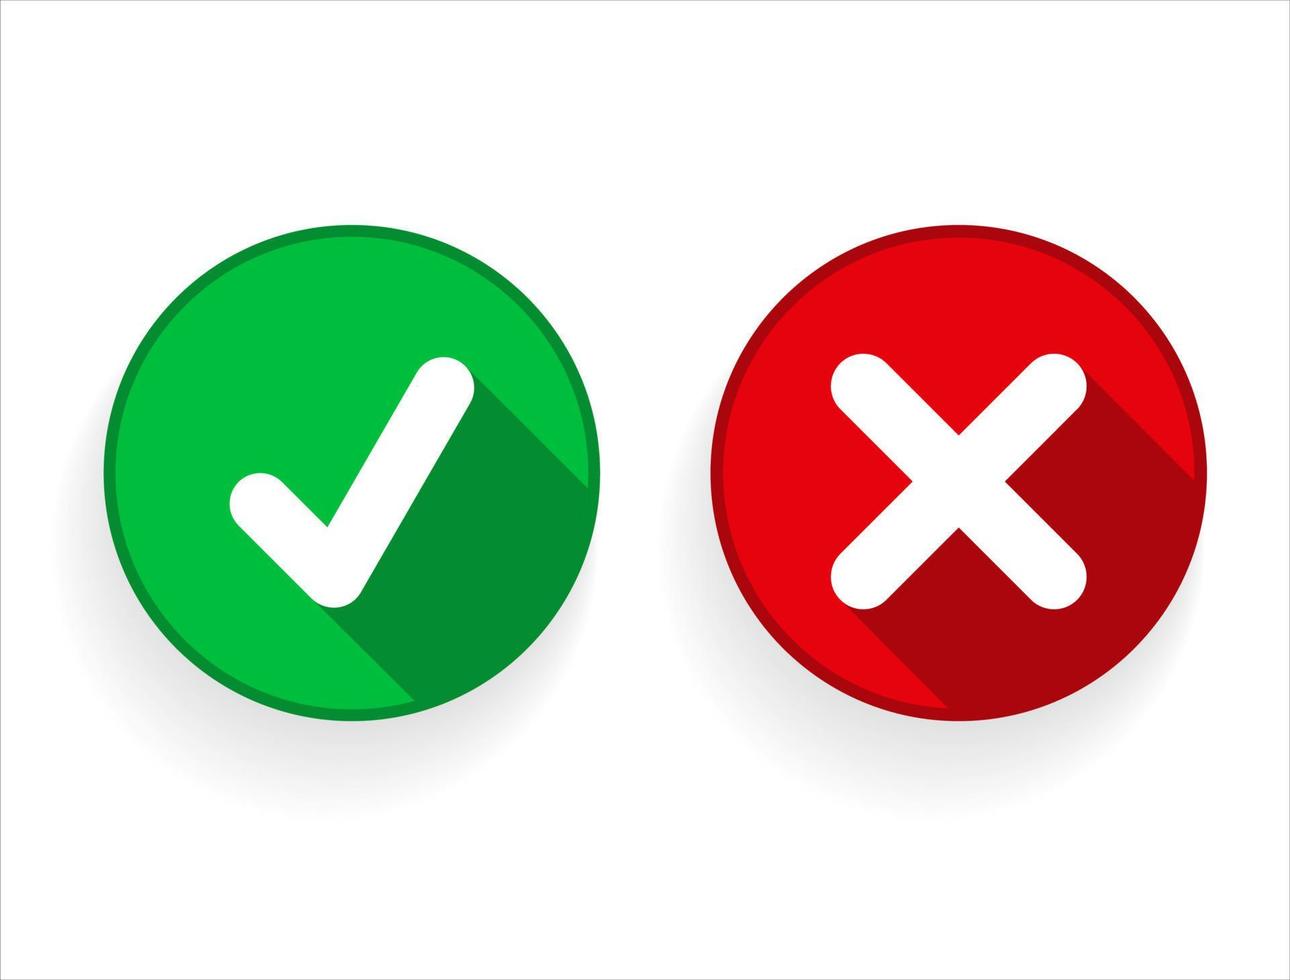 Green check mark and red cross mark icon set vector